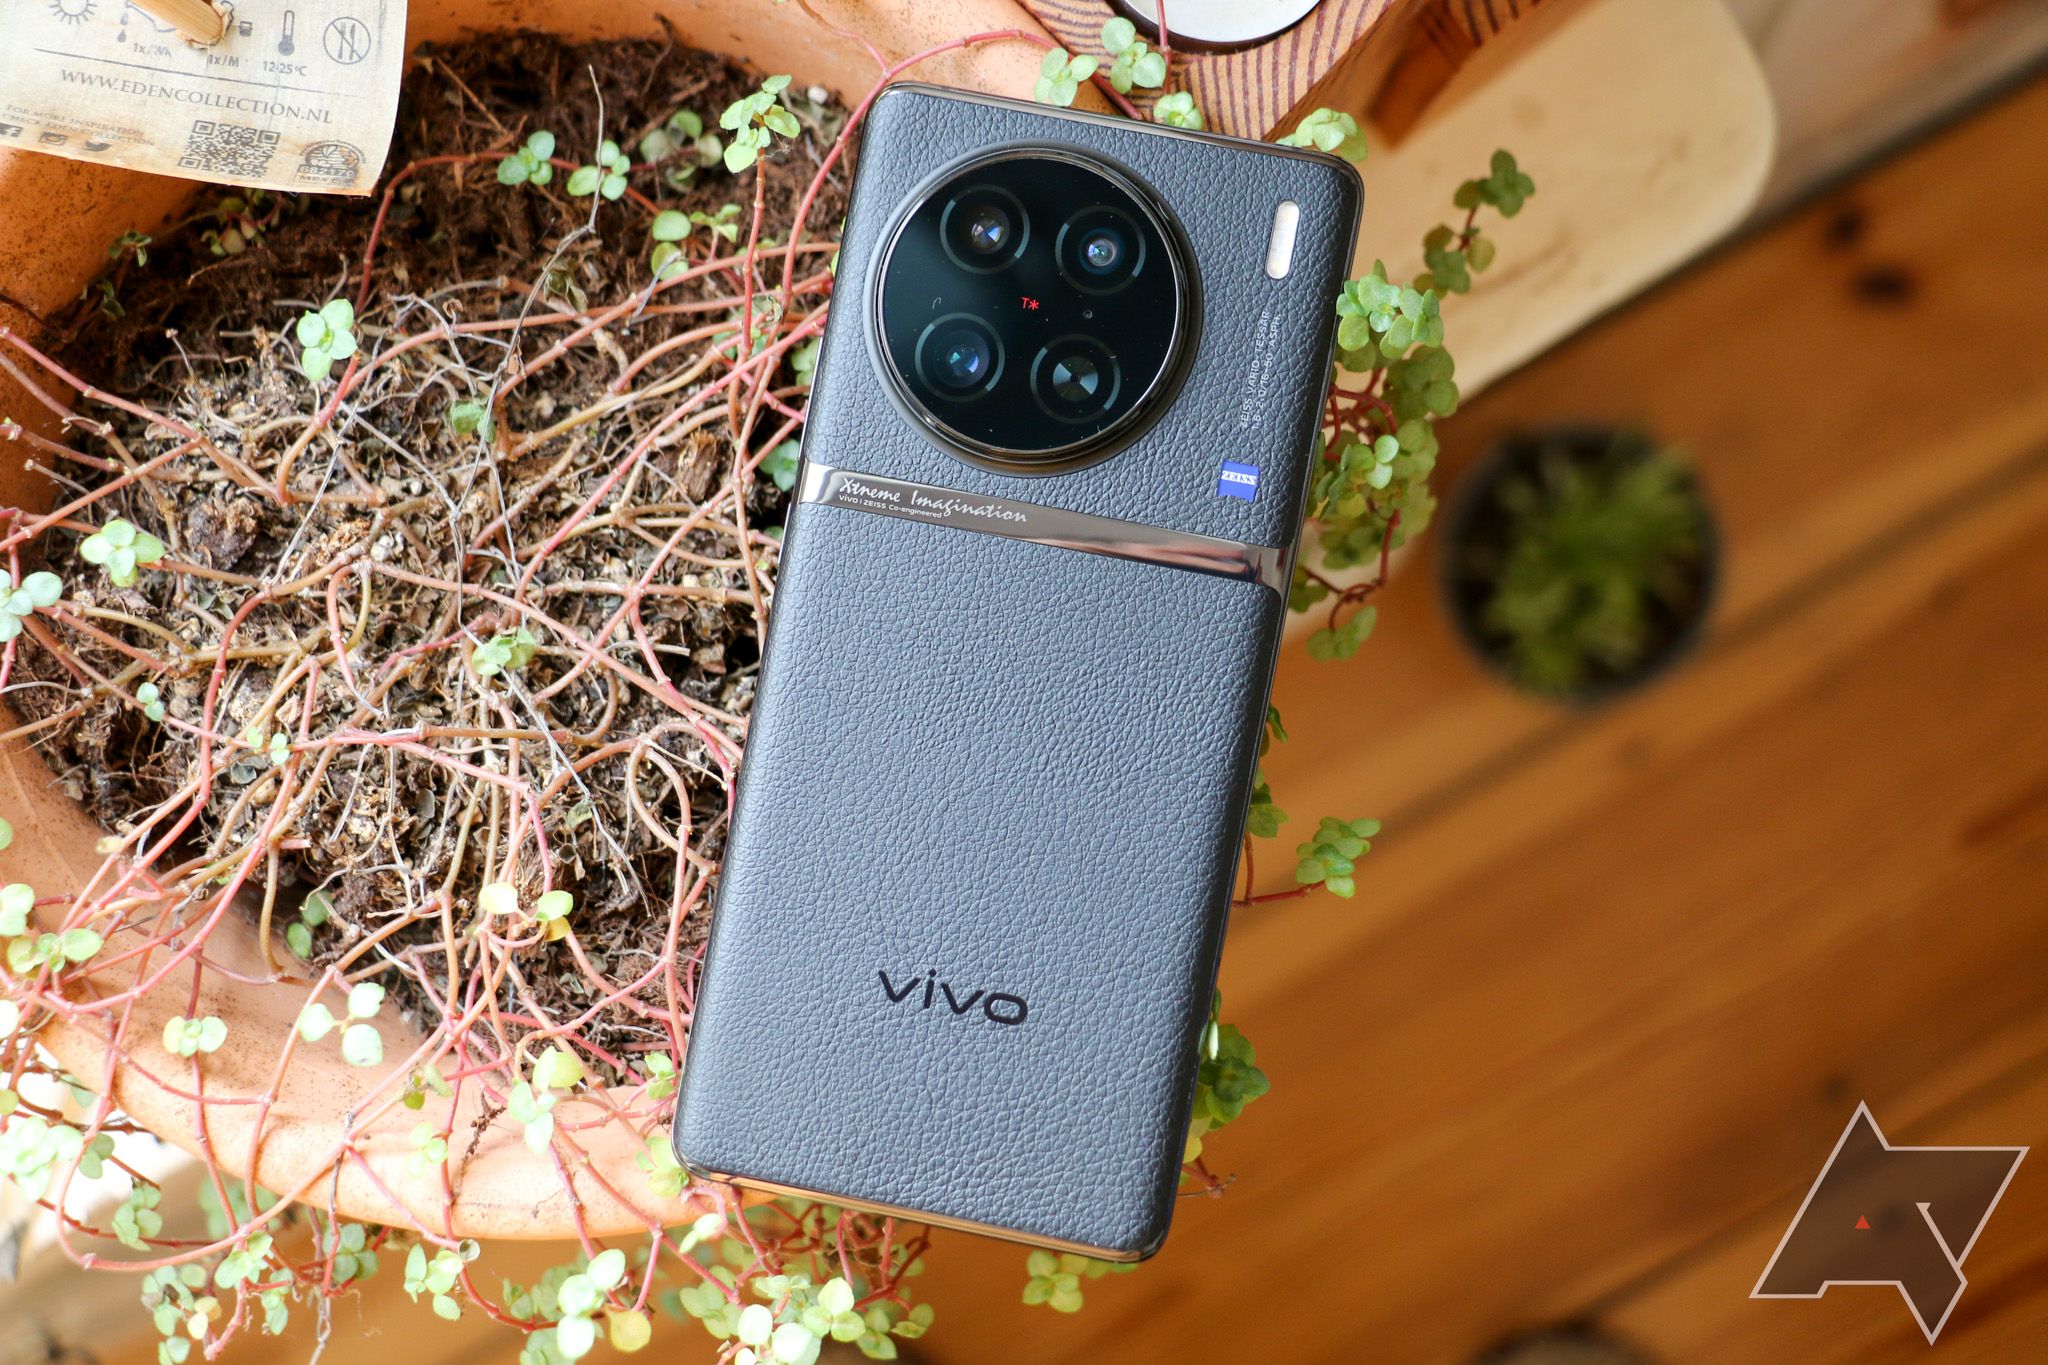 Vivo X90 Pro review: I'm in love with the camera